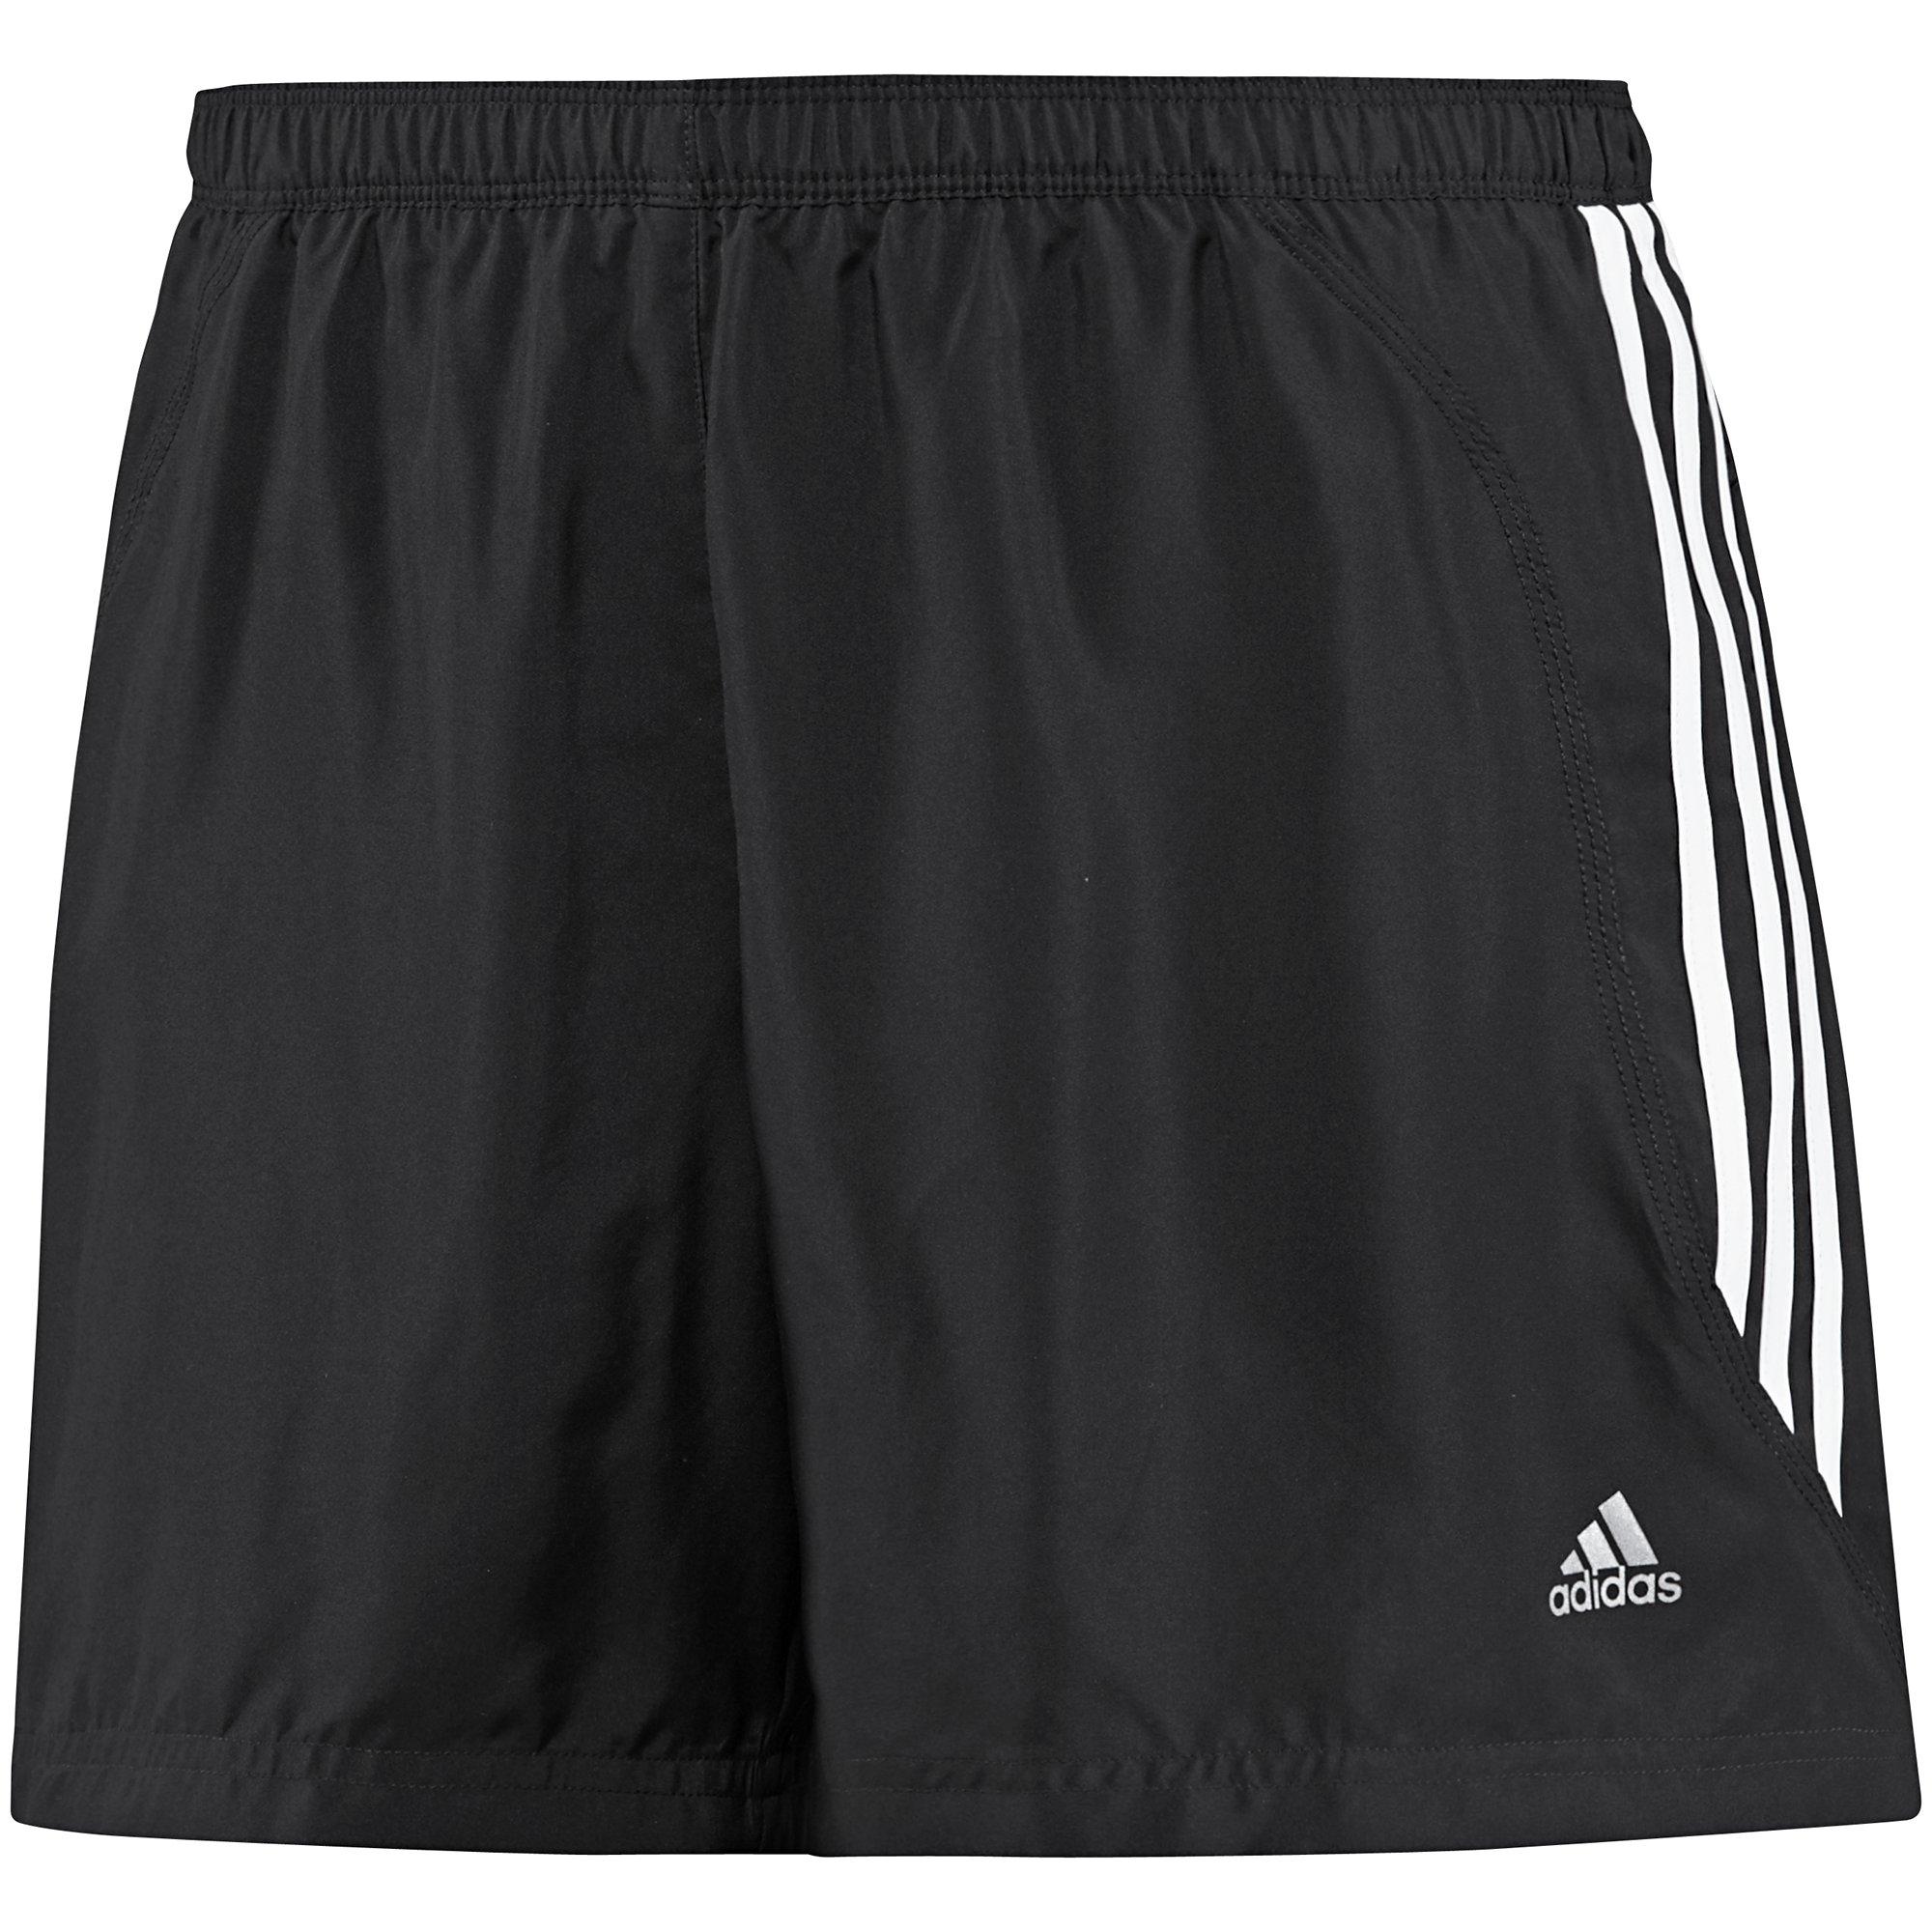 Foto adidas RSP DS Sh 6inch Mujer foto 285679